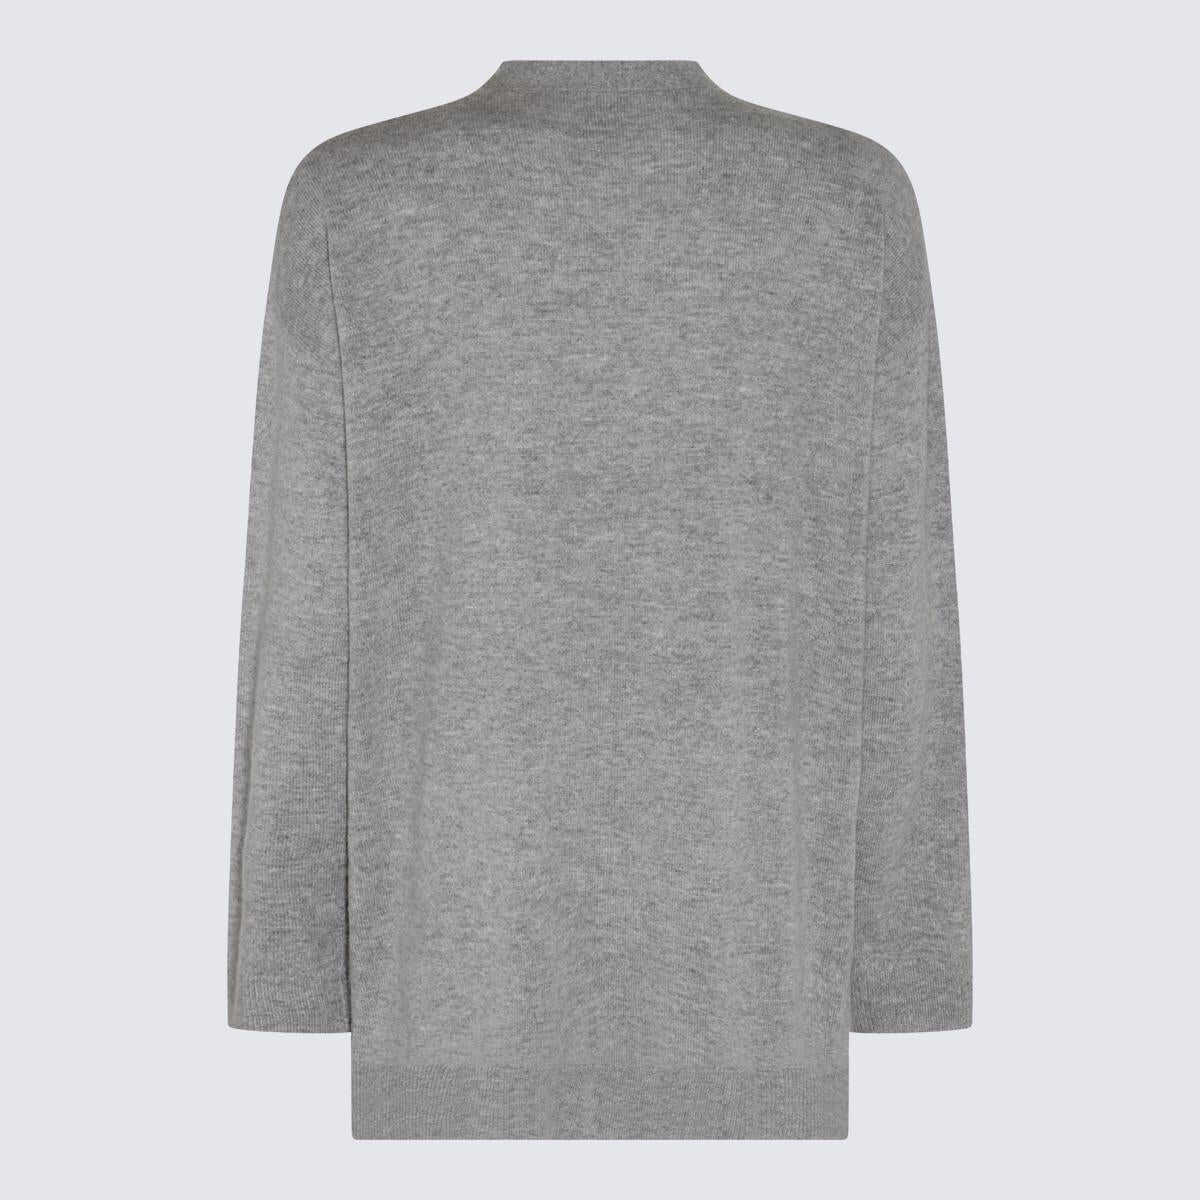 Allude ALLUDE GREY WOOL AND CASHMERE BLEND CARDIGAN GREY